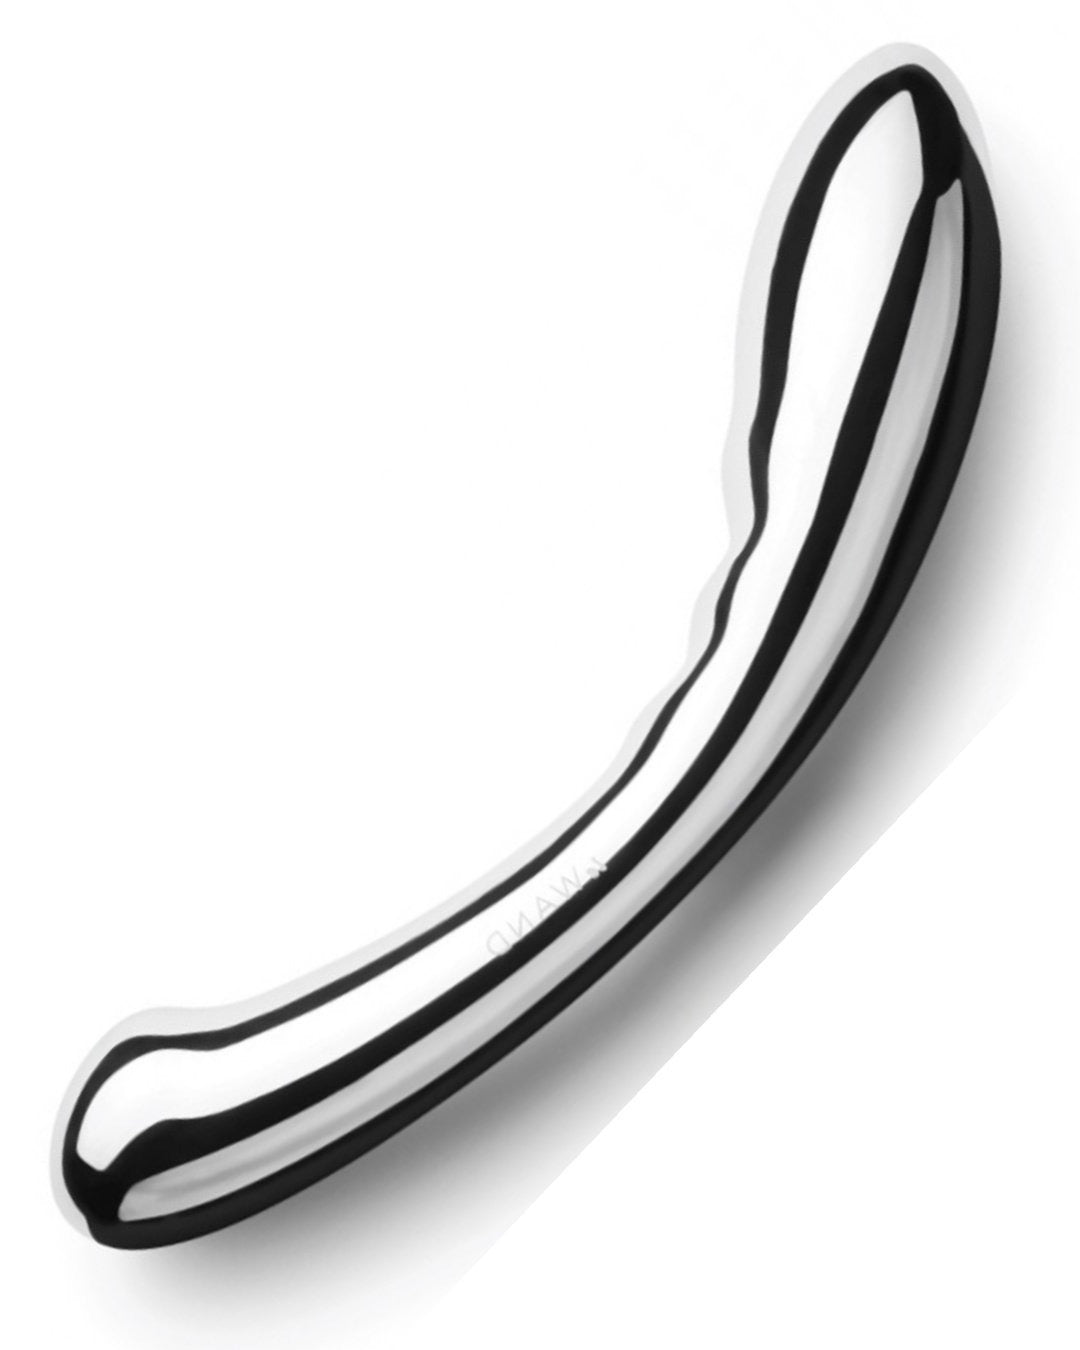 Le Wand Arch Double Ended Stainless Steel Dildo against a white background, side view to show the curve and ends